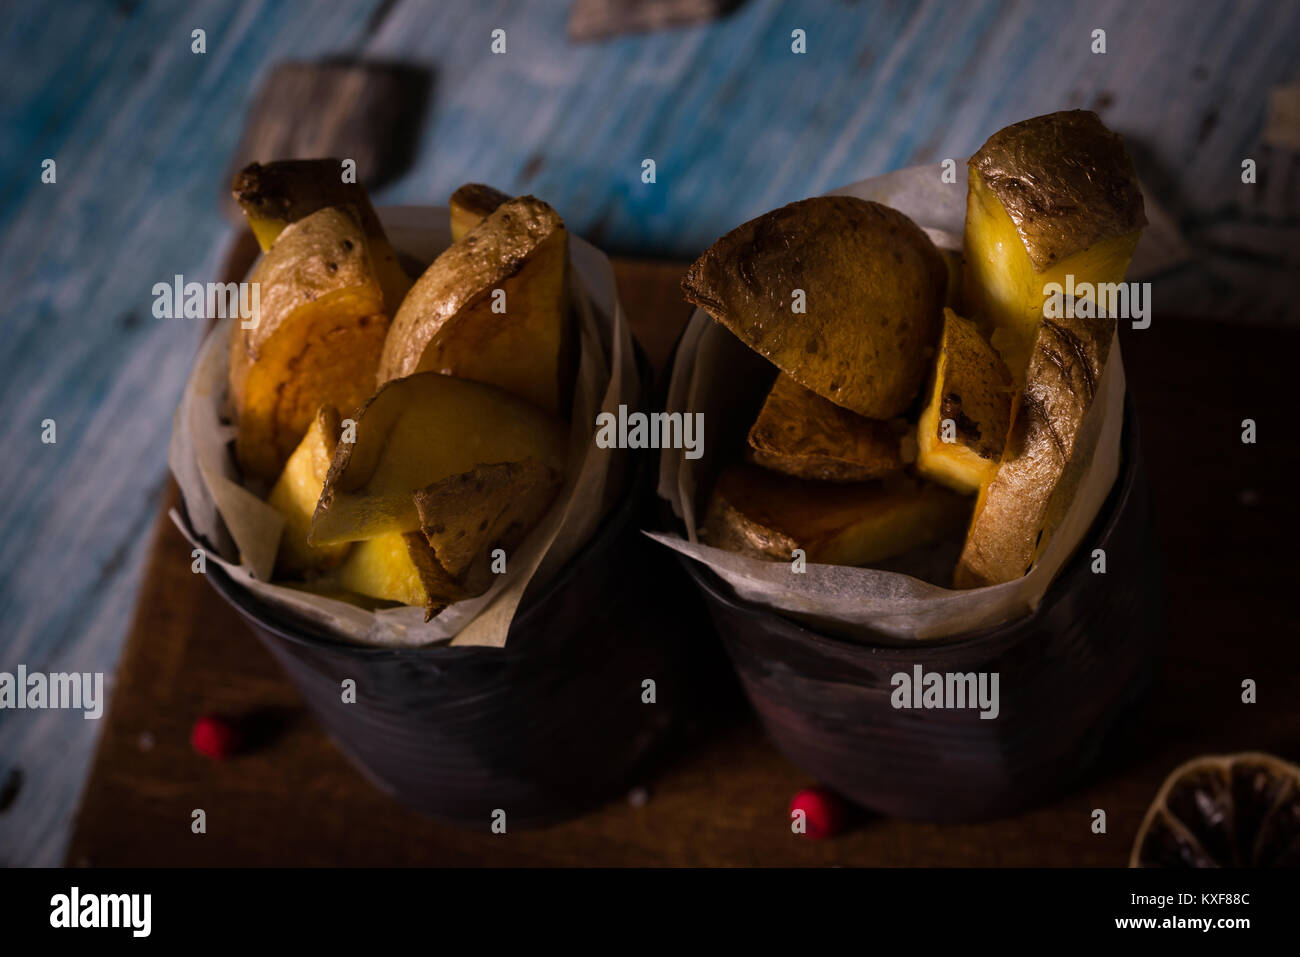 Horizontal photo on two vintage worn metal cans which are filled by paper sheet and roasted potato strips. Cans are on wooden board with worn blue and Stock Photo